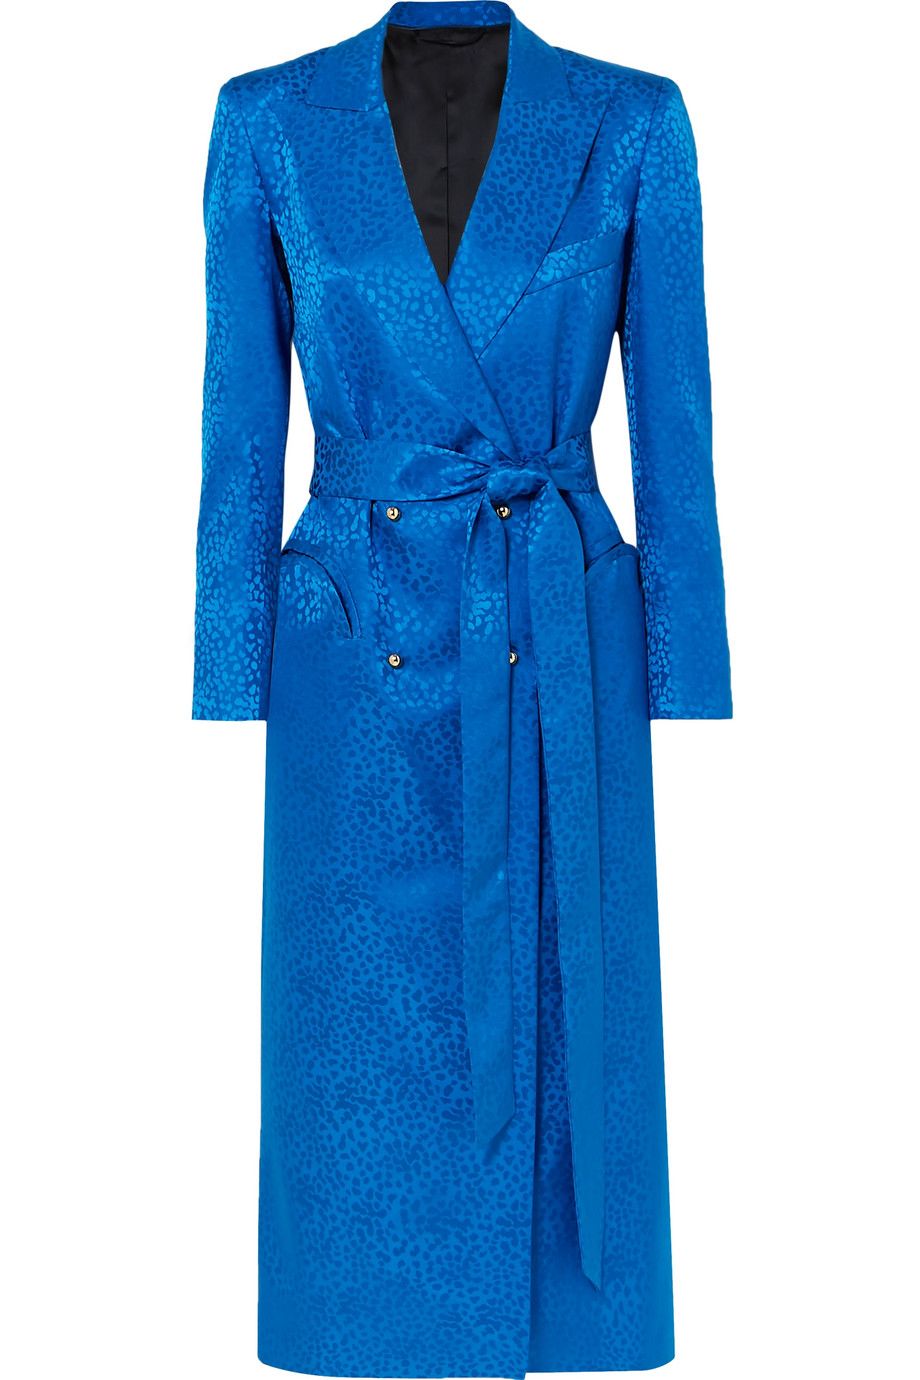 Clothing, Blue, Cobalt blue, Coat, Turquoise, Trench coat, Overcoat, Electric blue, Dress, Outerwear, 